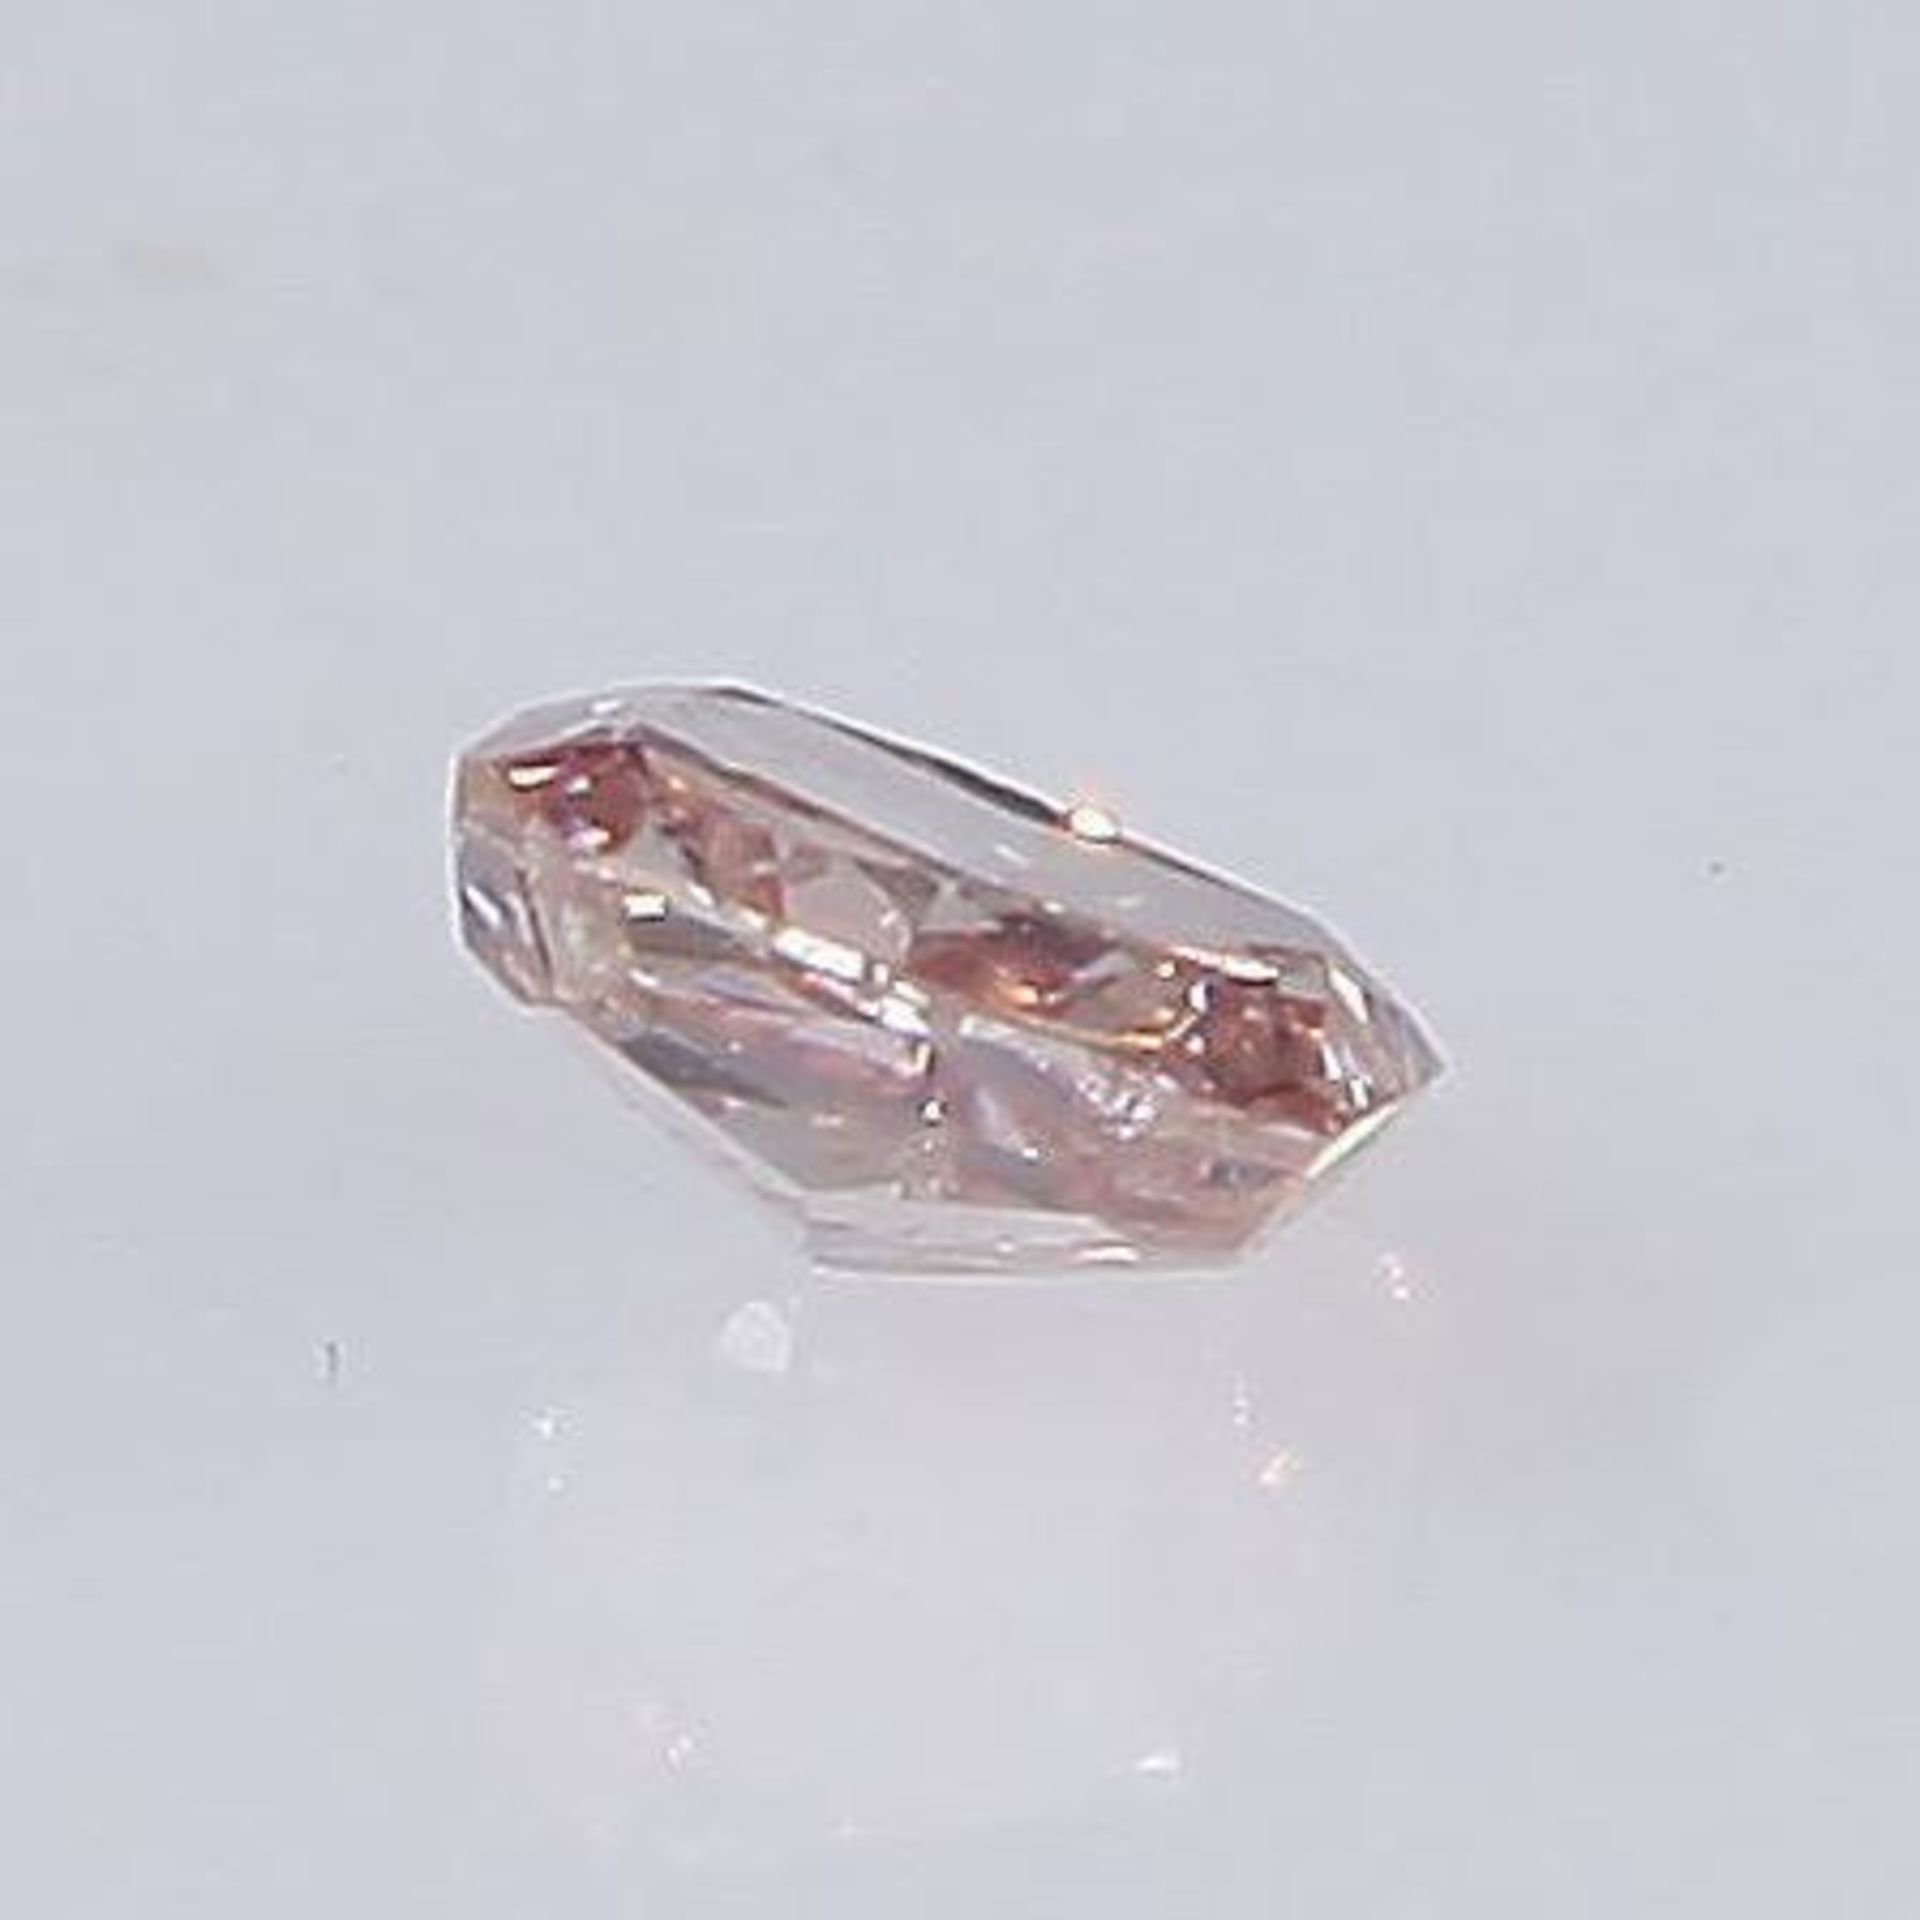 GIA Certified 0.08 ct. Fancy Orangy Pink Diamond - Image 8 of 10